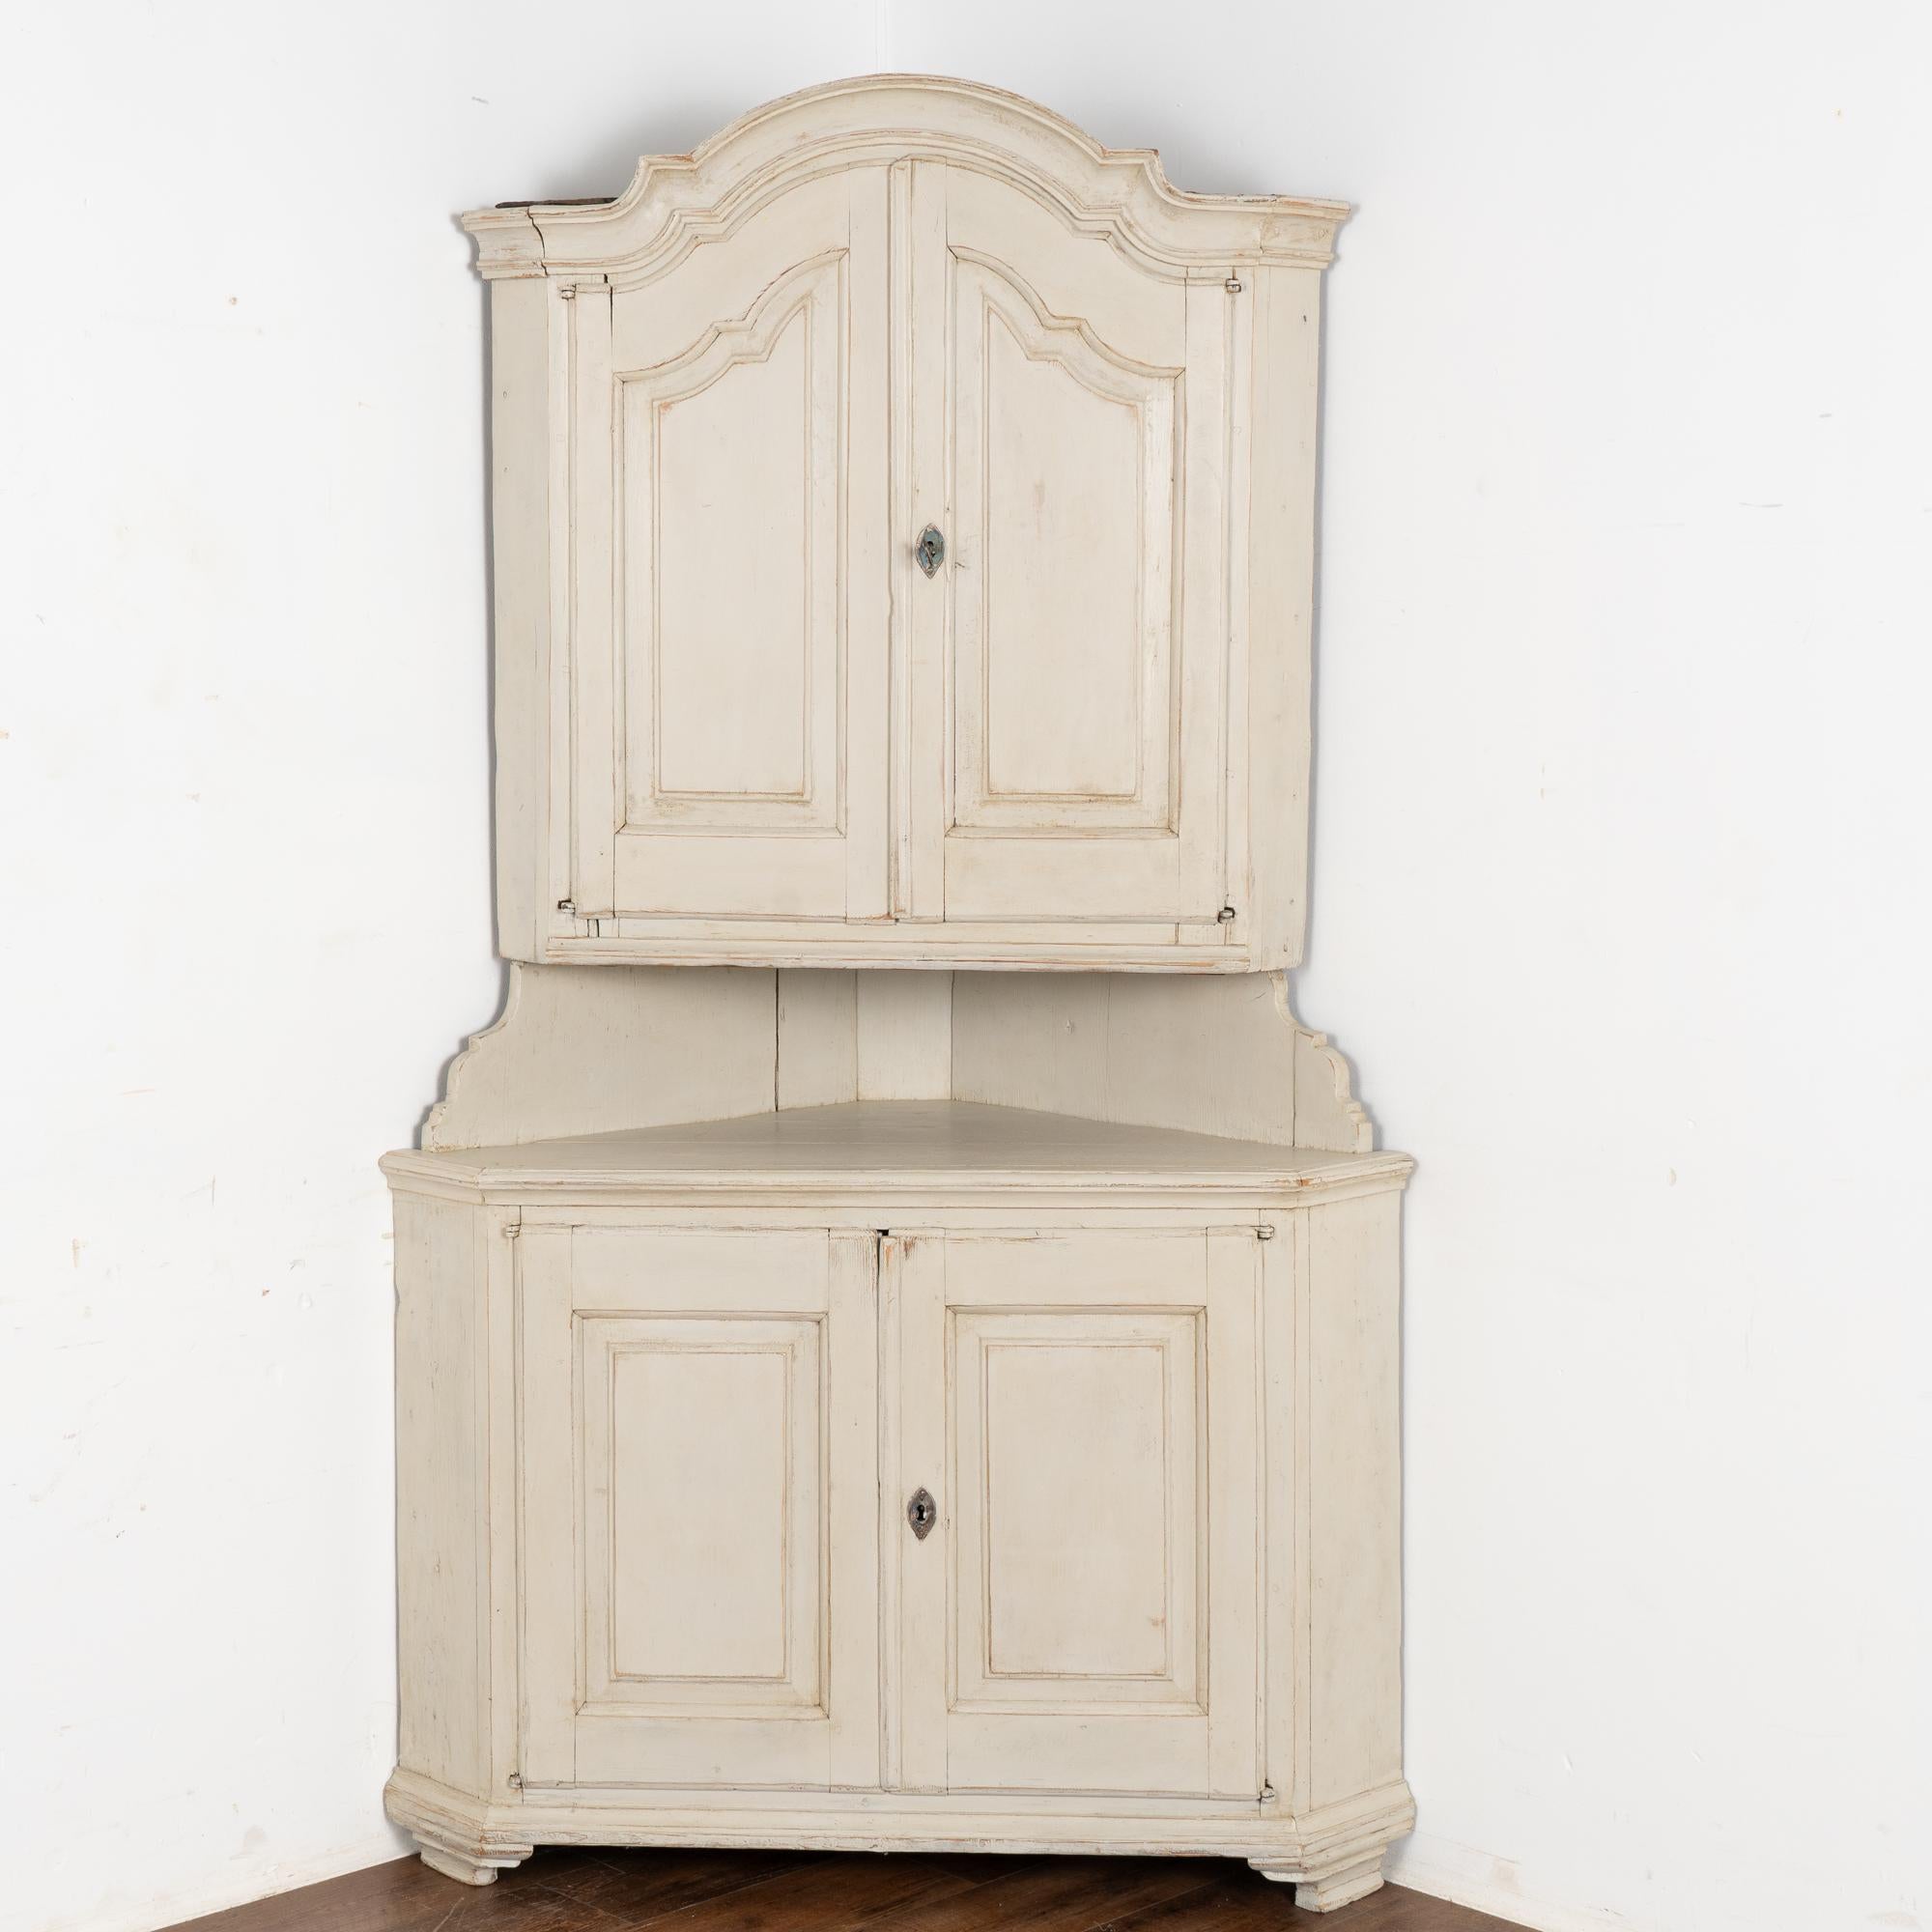 This pine corner cabinet has lovely paneled doors which compliment the curve of the bonnet or crown.
It is built in two sections and reaches 7' tall. 
The old white painted finish shows signs of distress, wear and some staining which simply add to